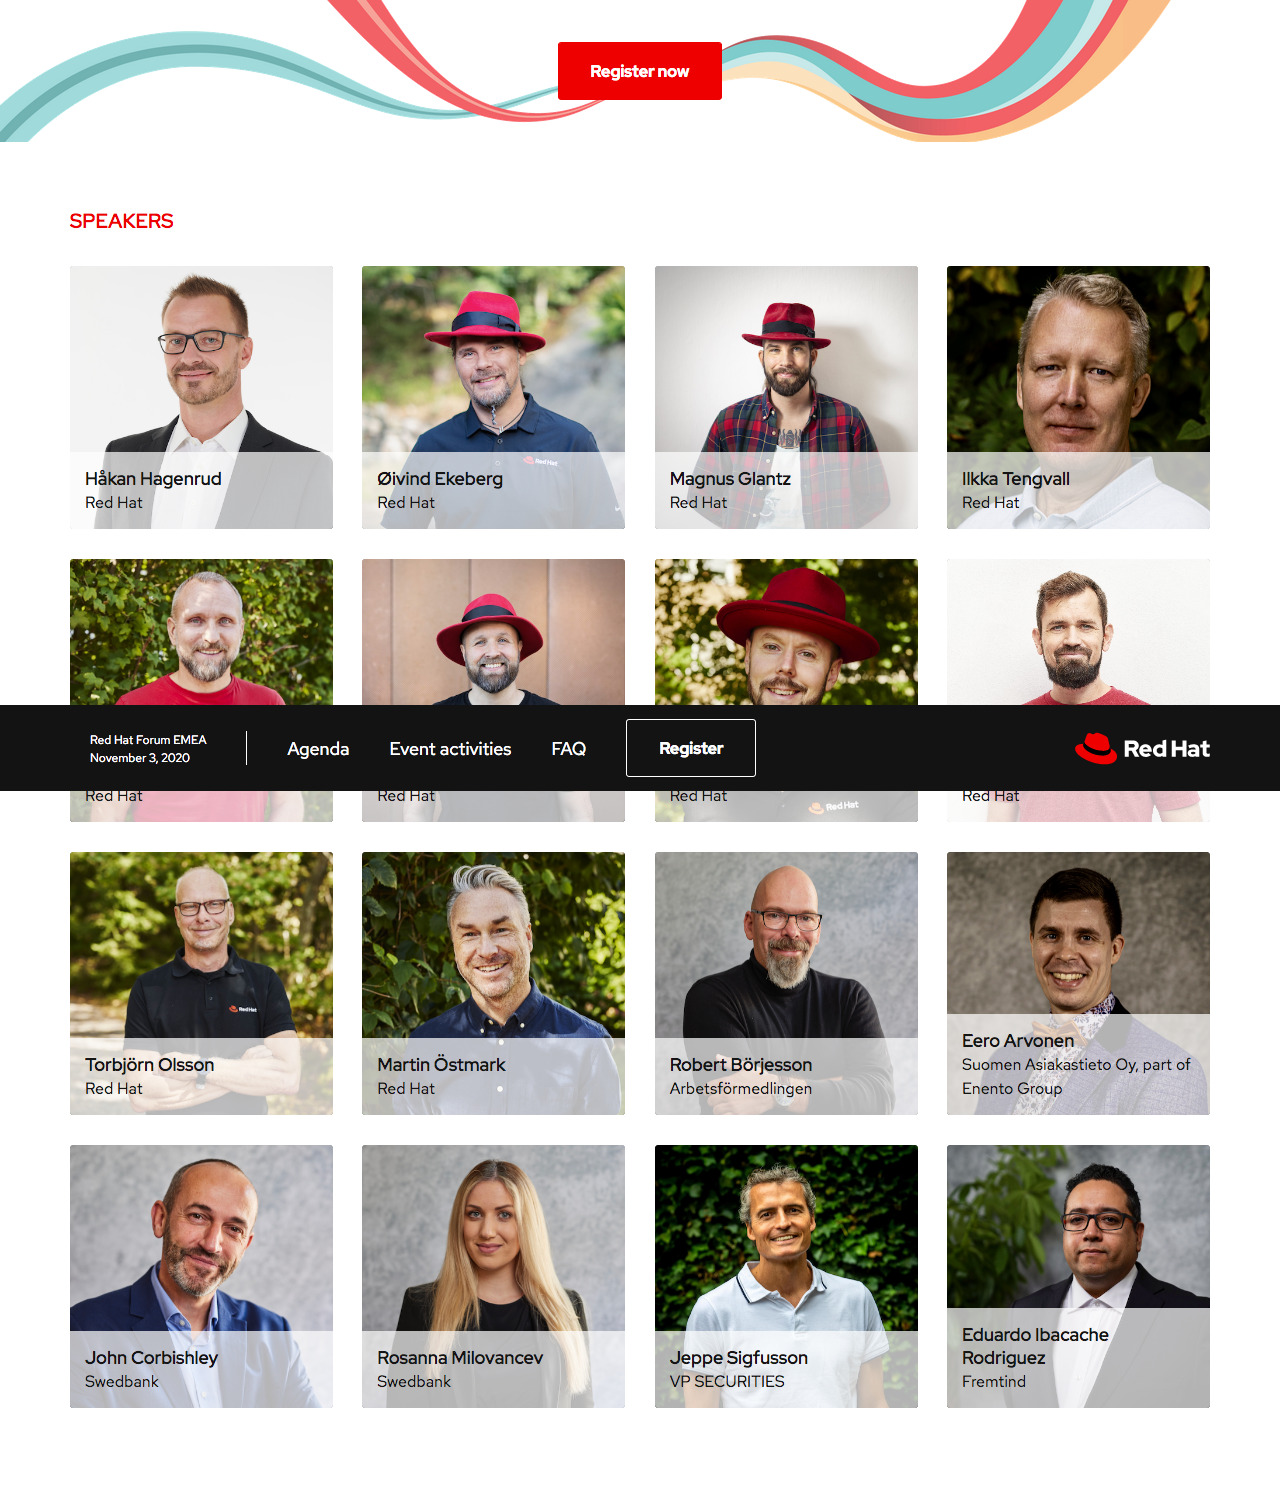 You are invited! Red Hat Forum VIrtual Experience 3 Nov 2020. 15